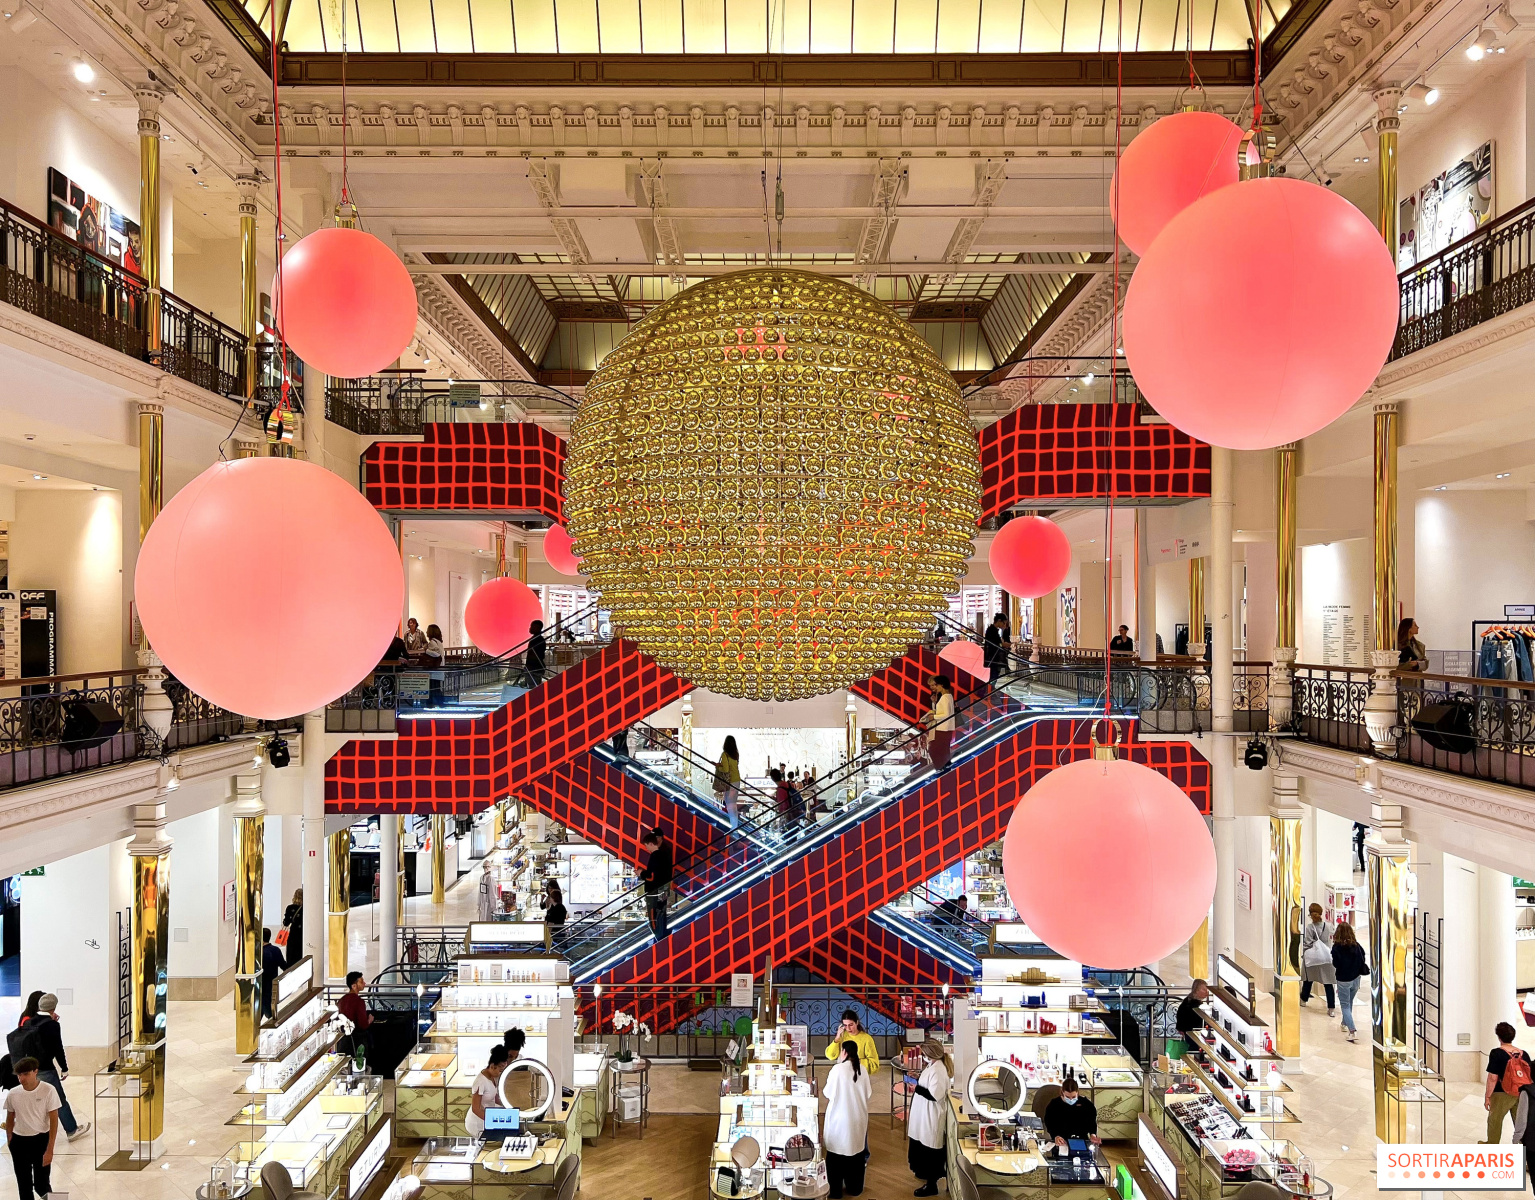 Vogue France - Saturday, Le Bon Marché Rive Gauche reopened its doors! What  if we went to admire these spectacular Christmas decorations while  respecting barrier gestures? © Instagram @lebonmarcherivegauche